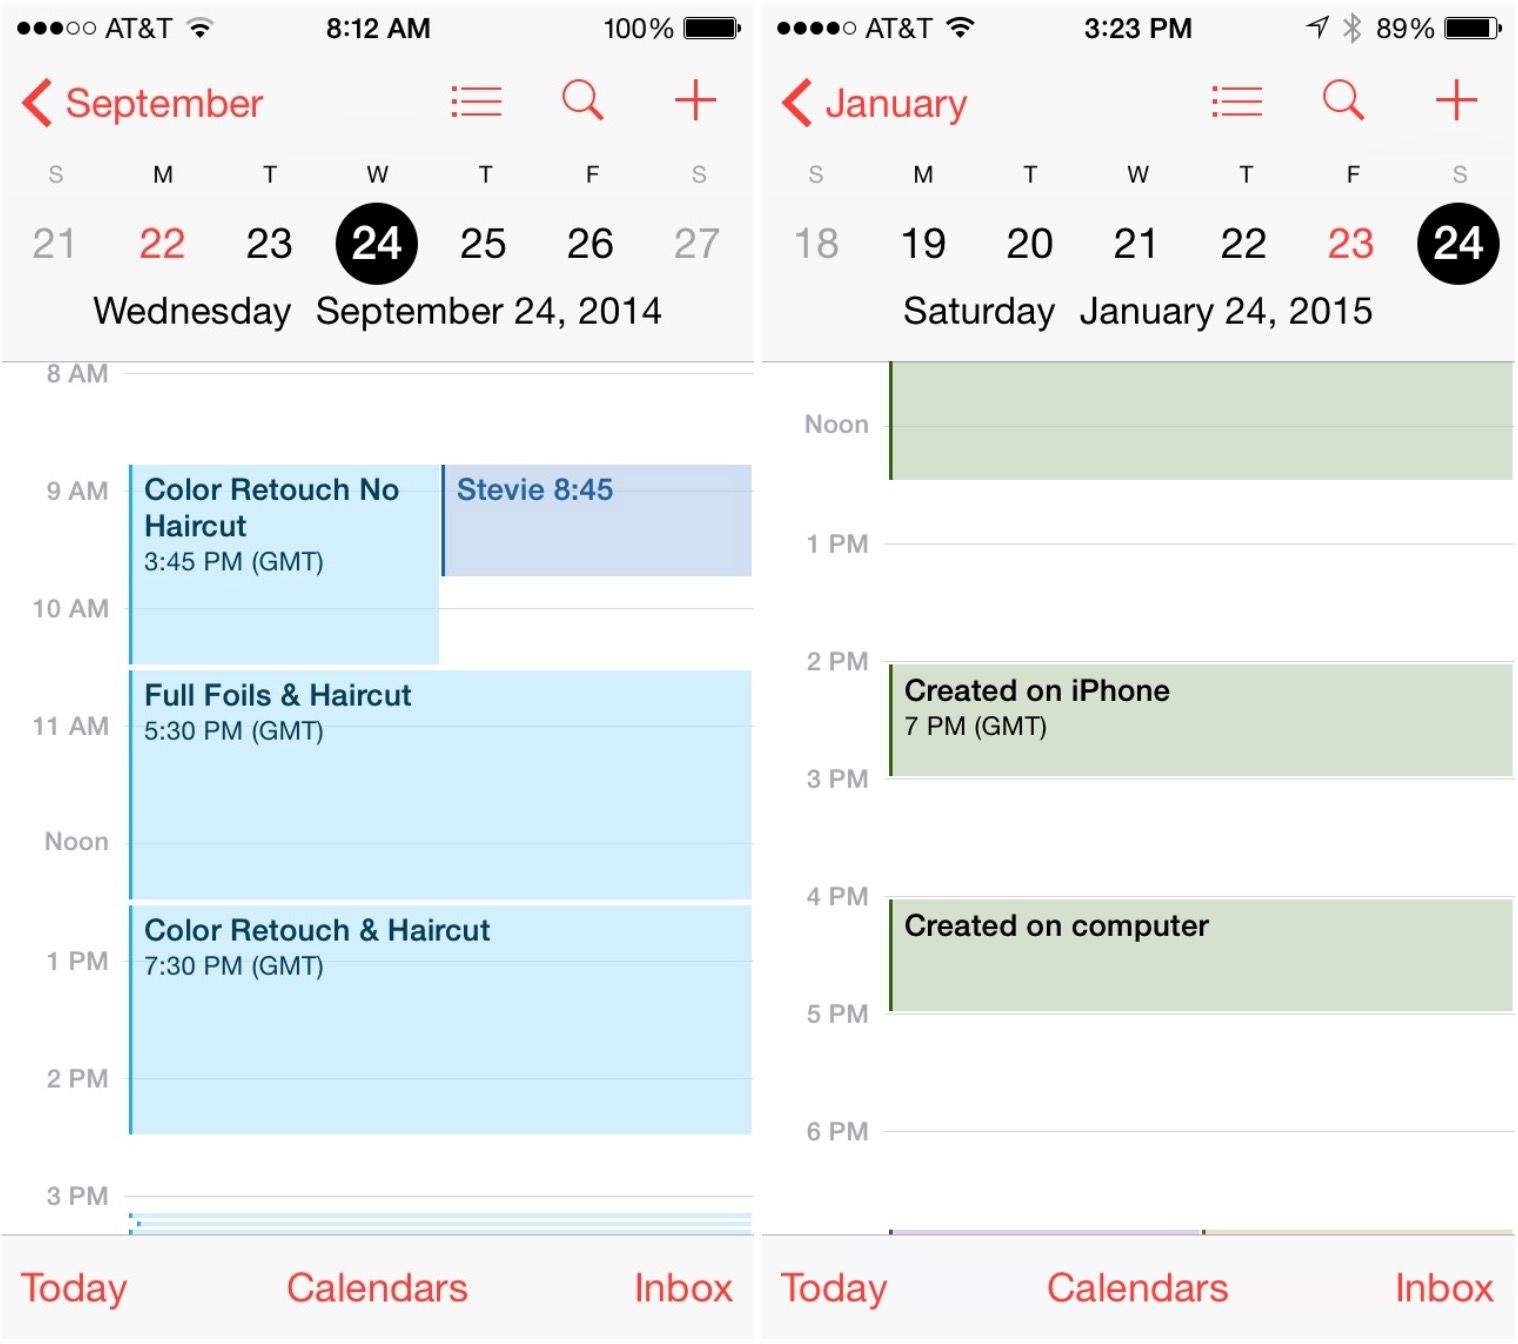 After four months, Apple has yet to fix a bad calendar bug in iOS 8.